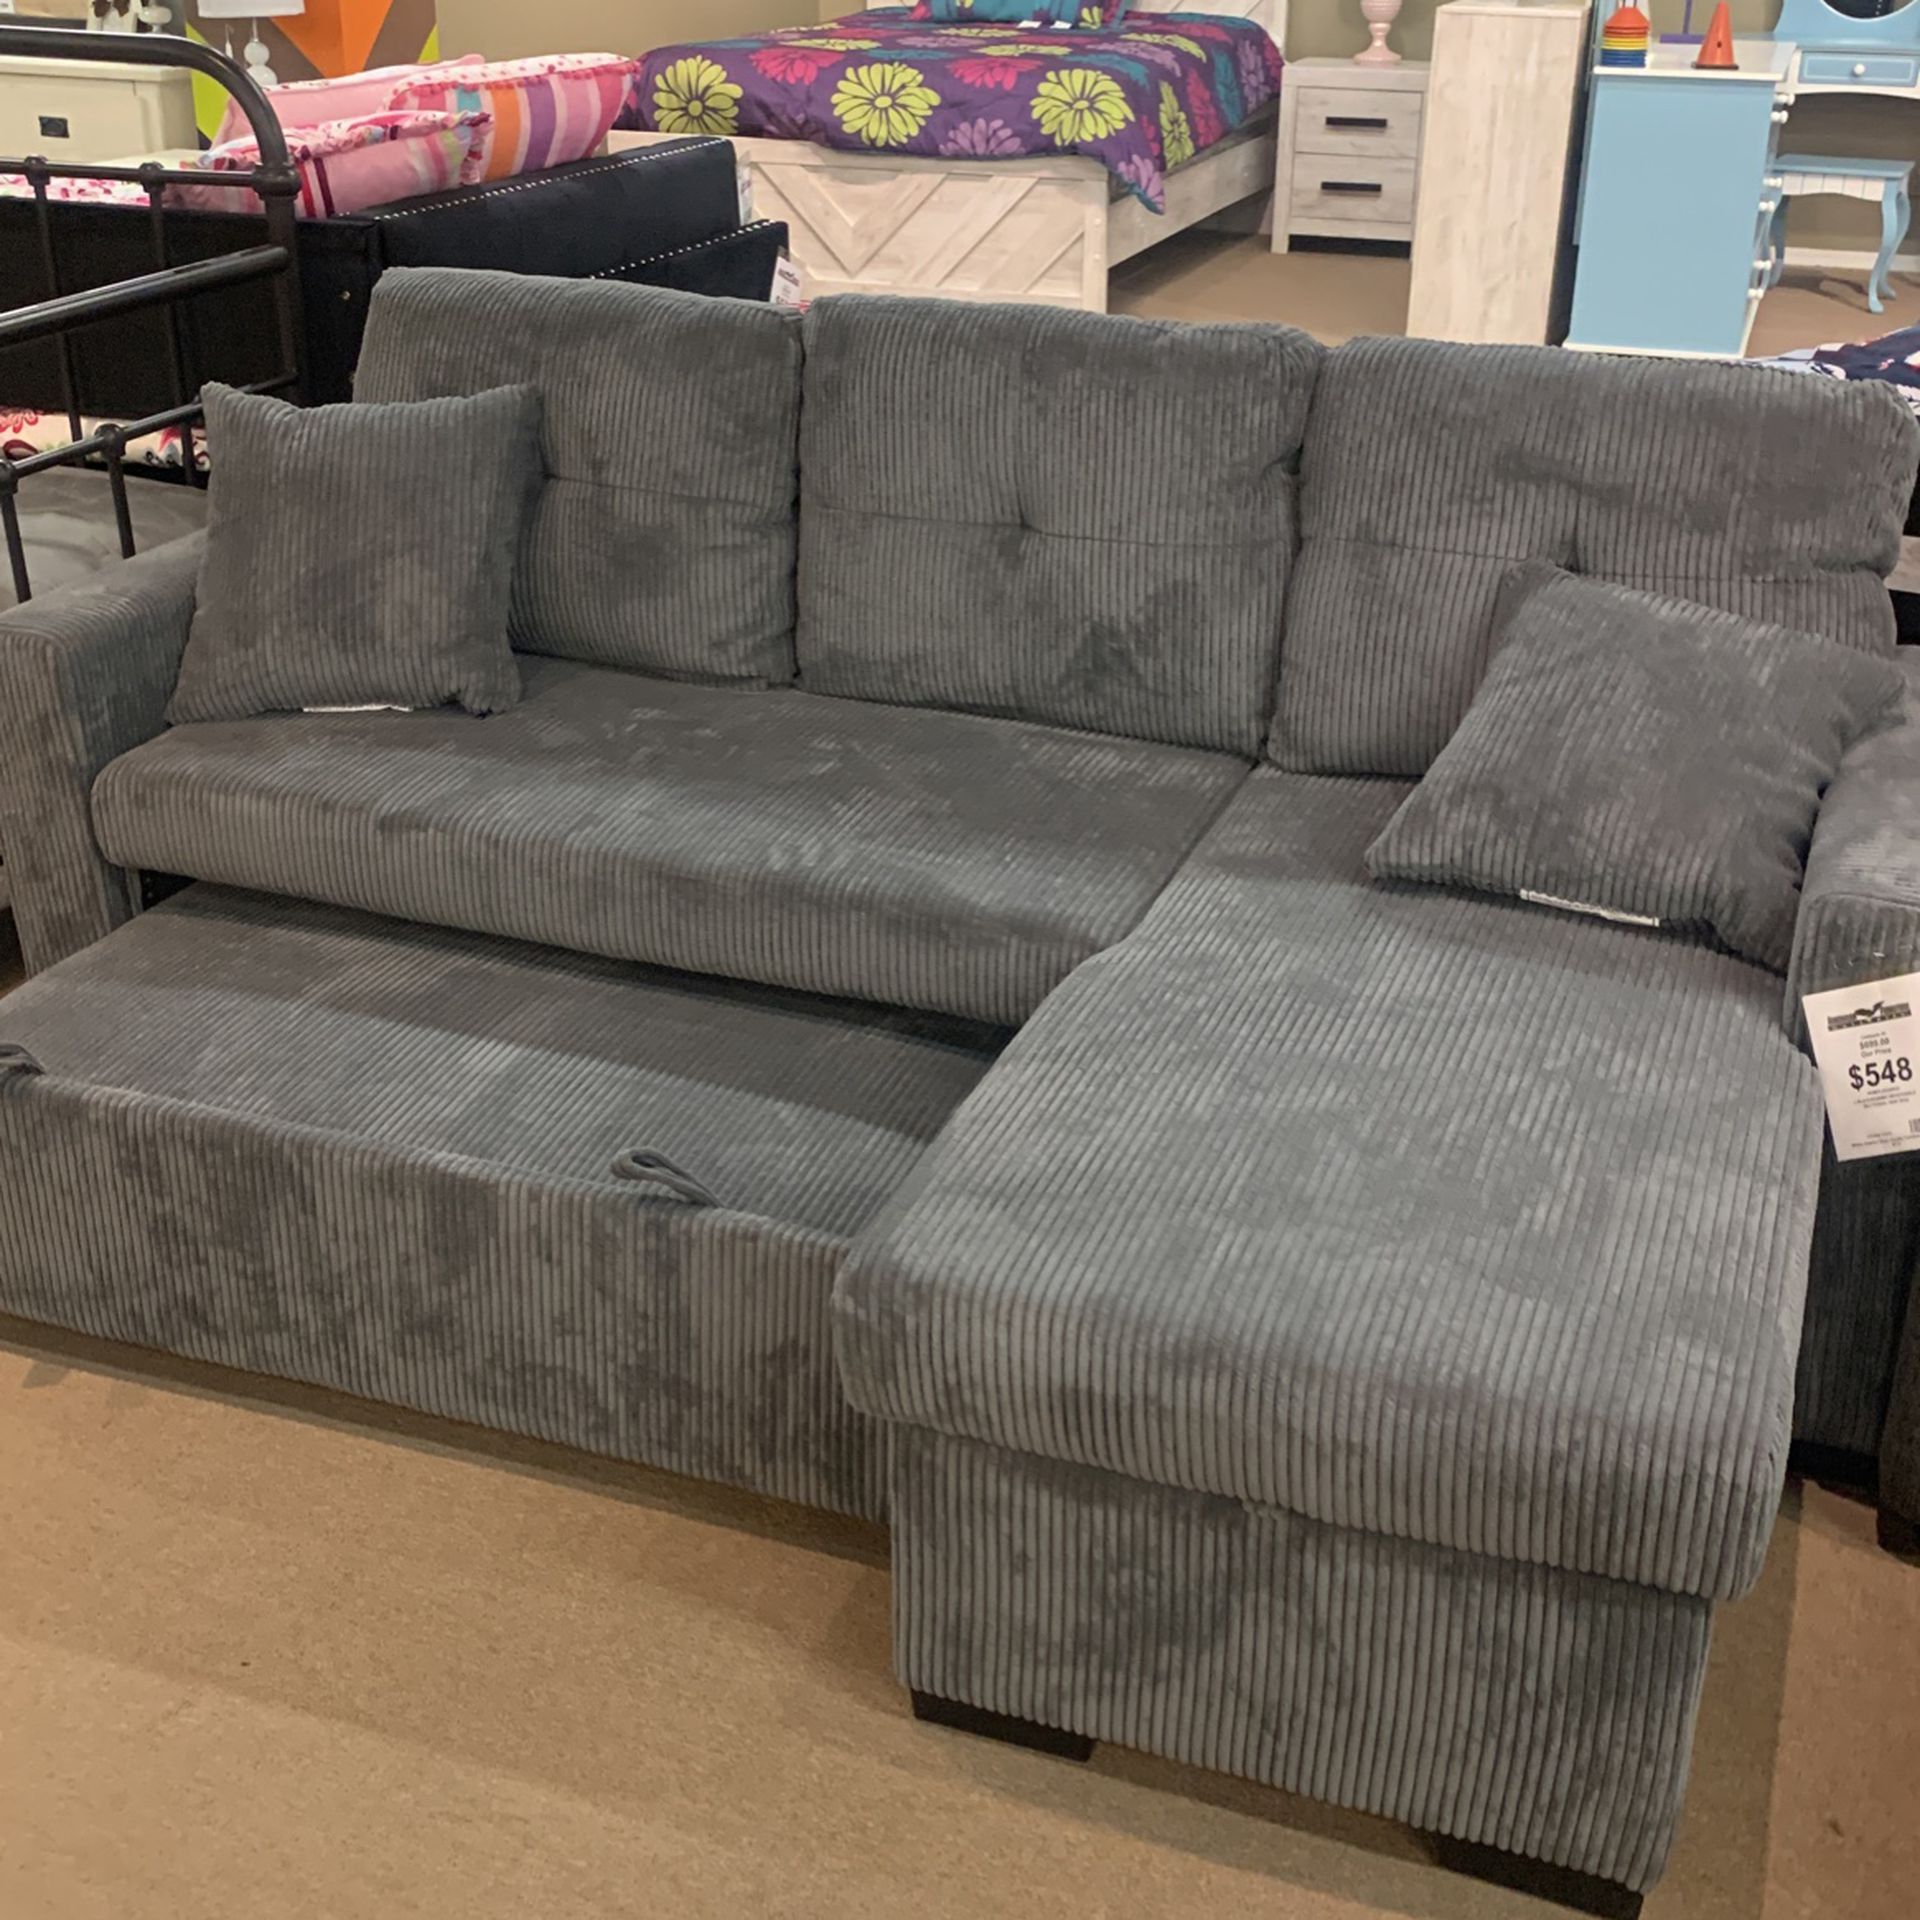 Sofa Chaise With Sectional Perfect Size Fir Small Space